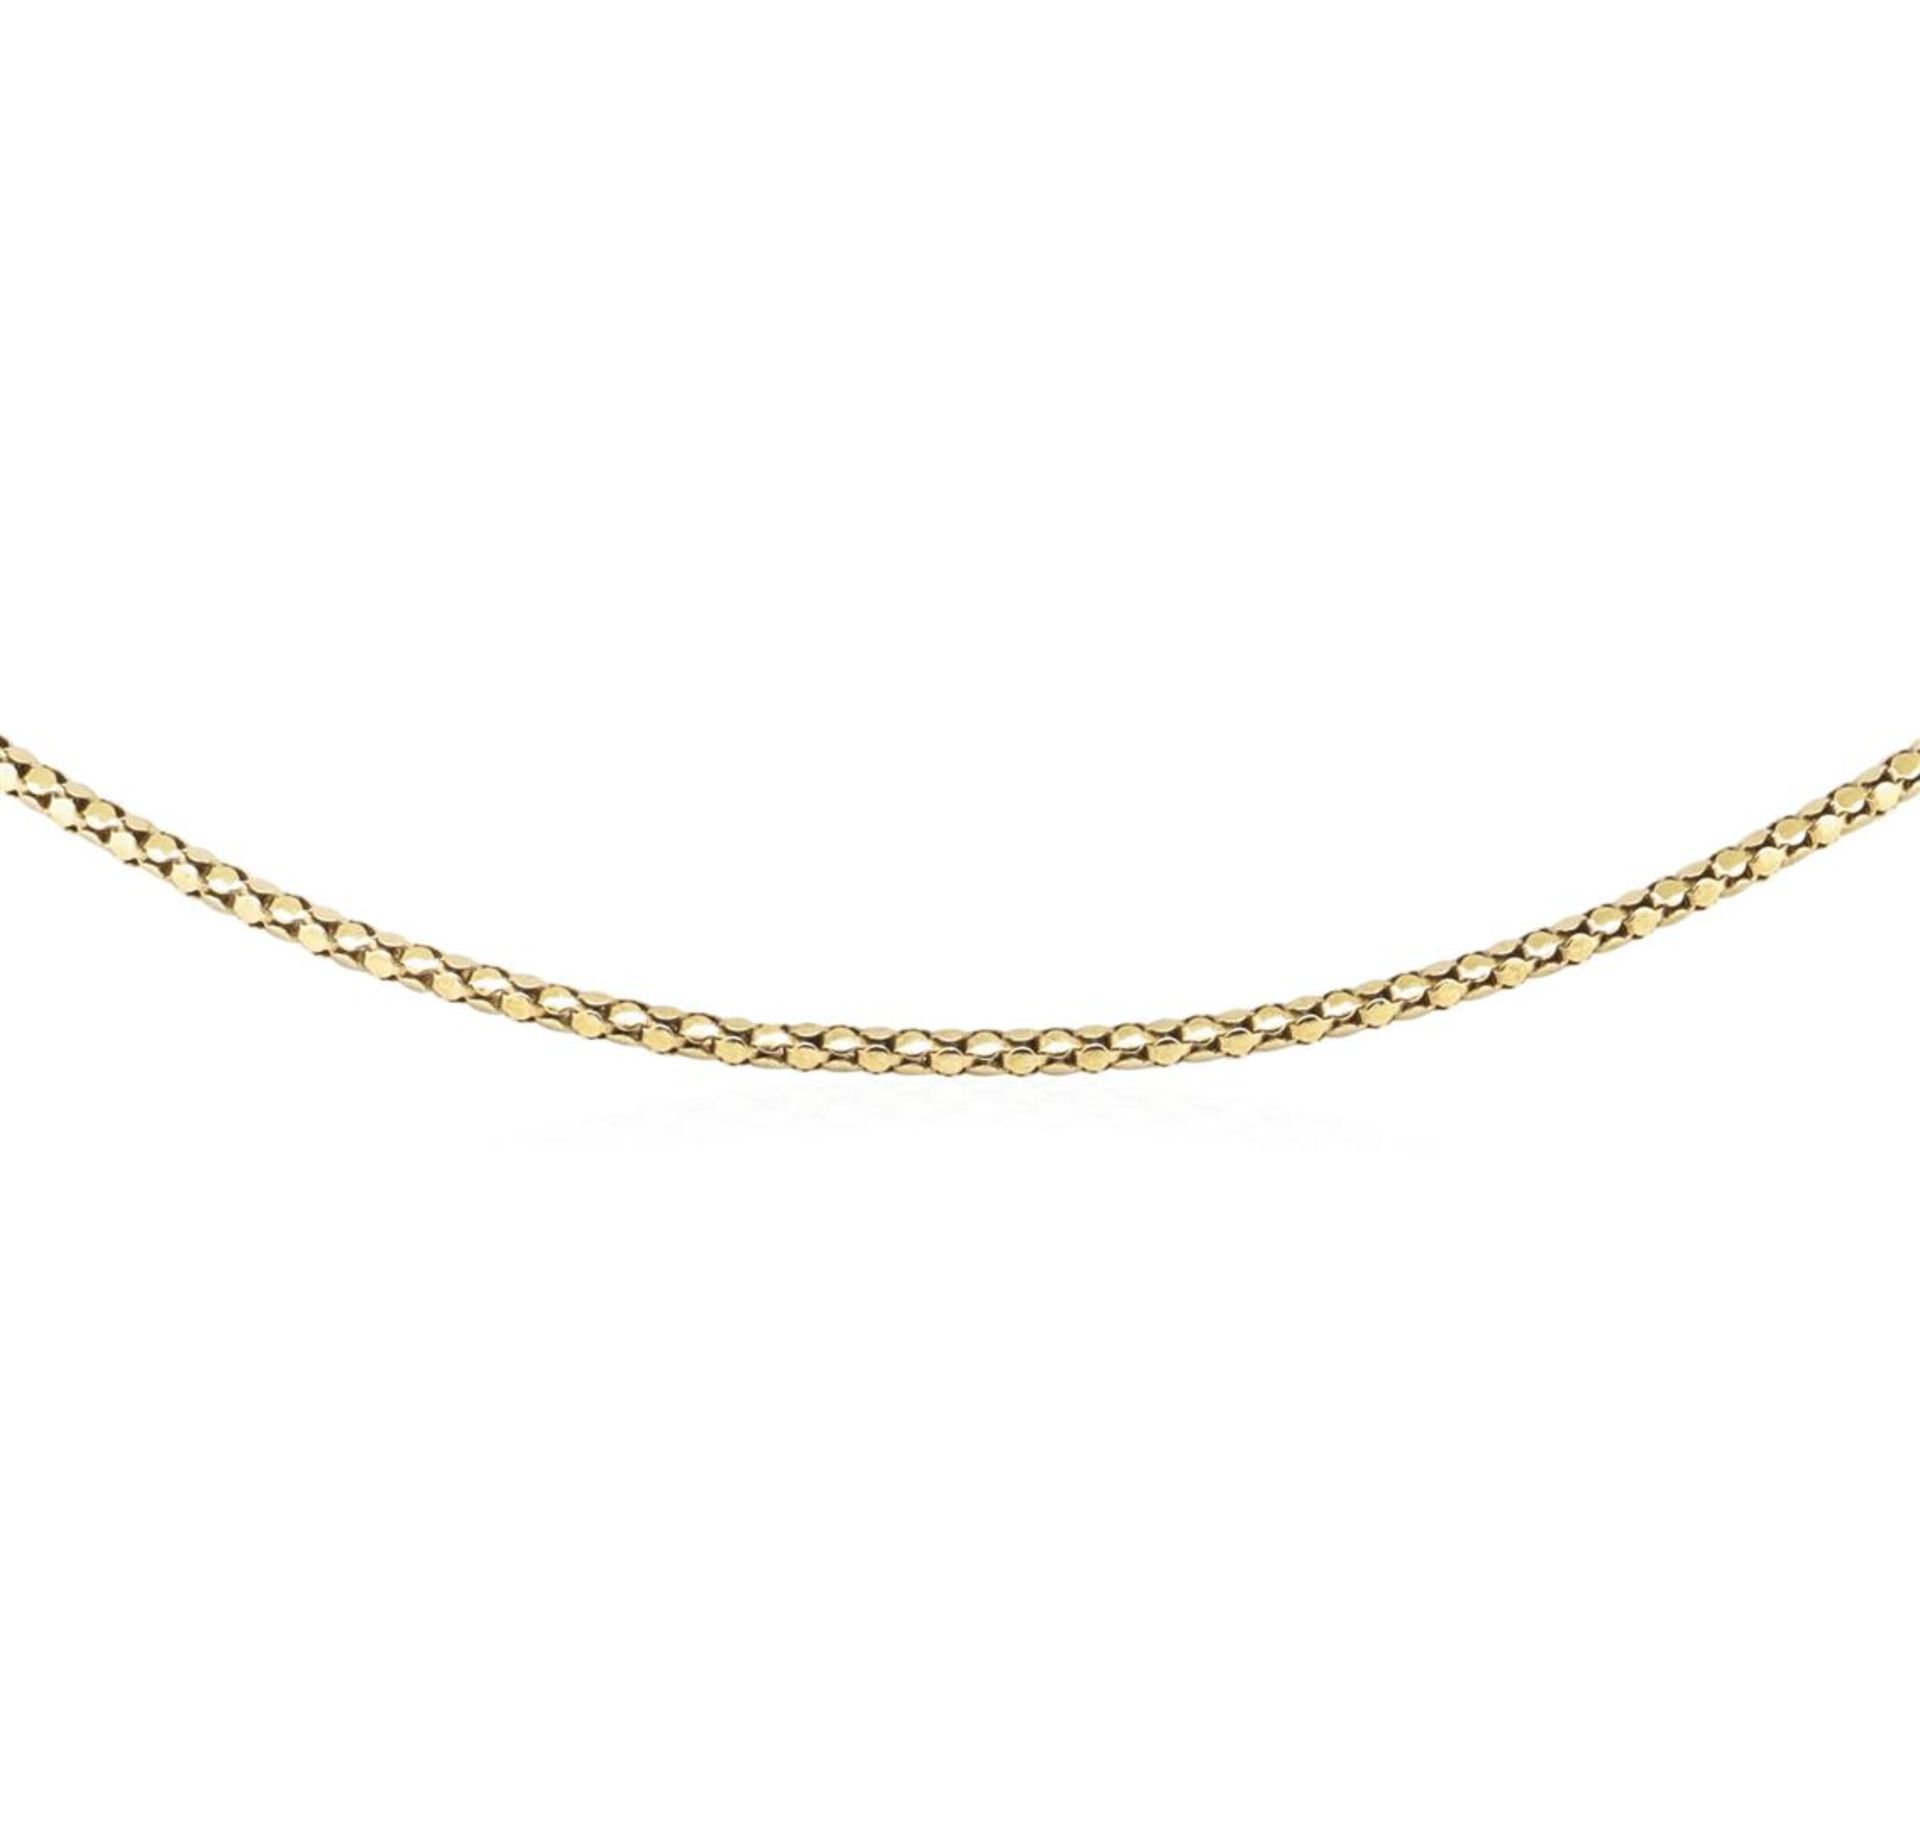 18 Inch Rounded Popcorn Link Chain - 14KT Yellow Gold - Image 2 of 2